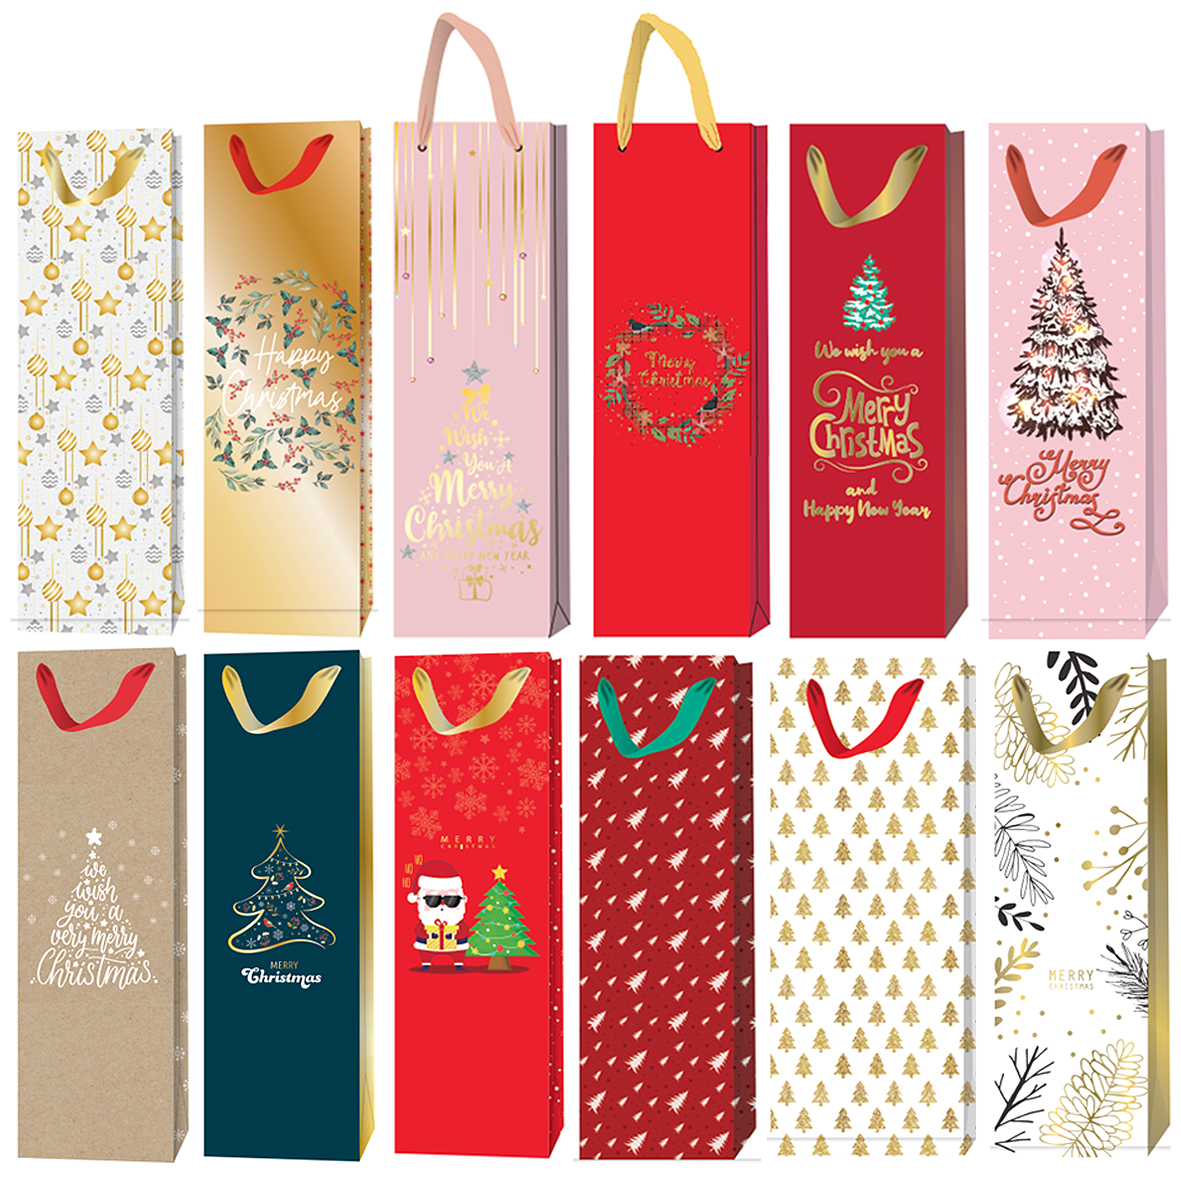 Christmas Gift Bags (Large, 18ct Merry Christmas Assortment) : Amazon.in:  Home & Kitchen